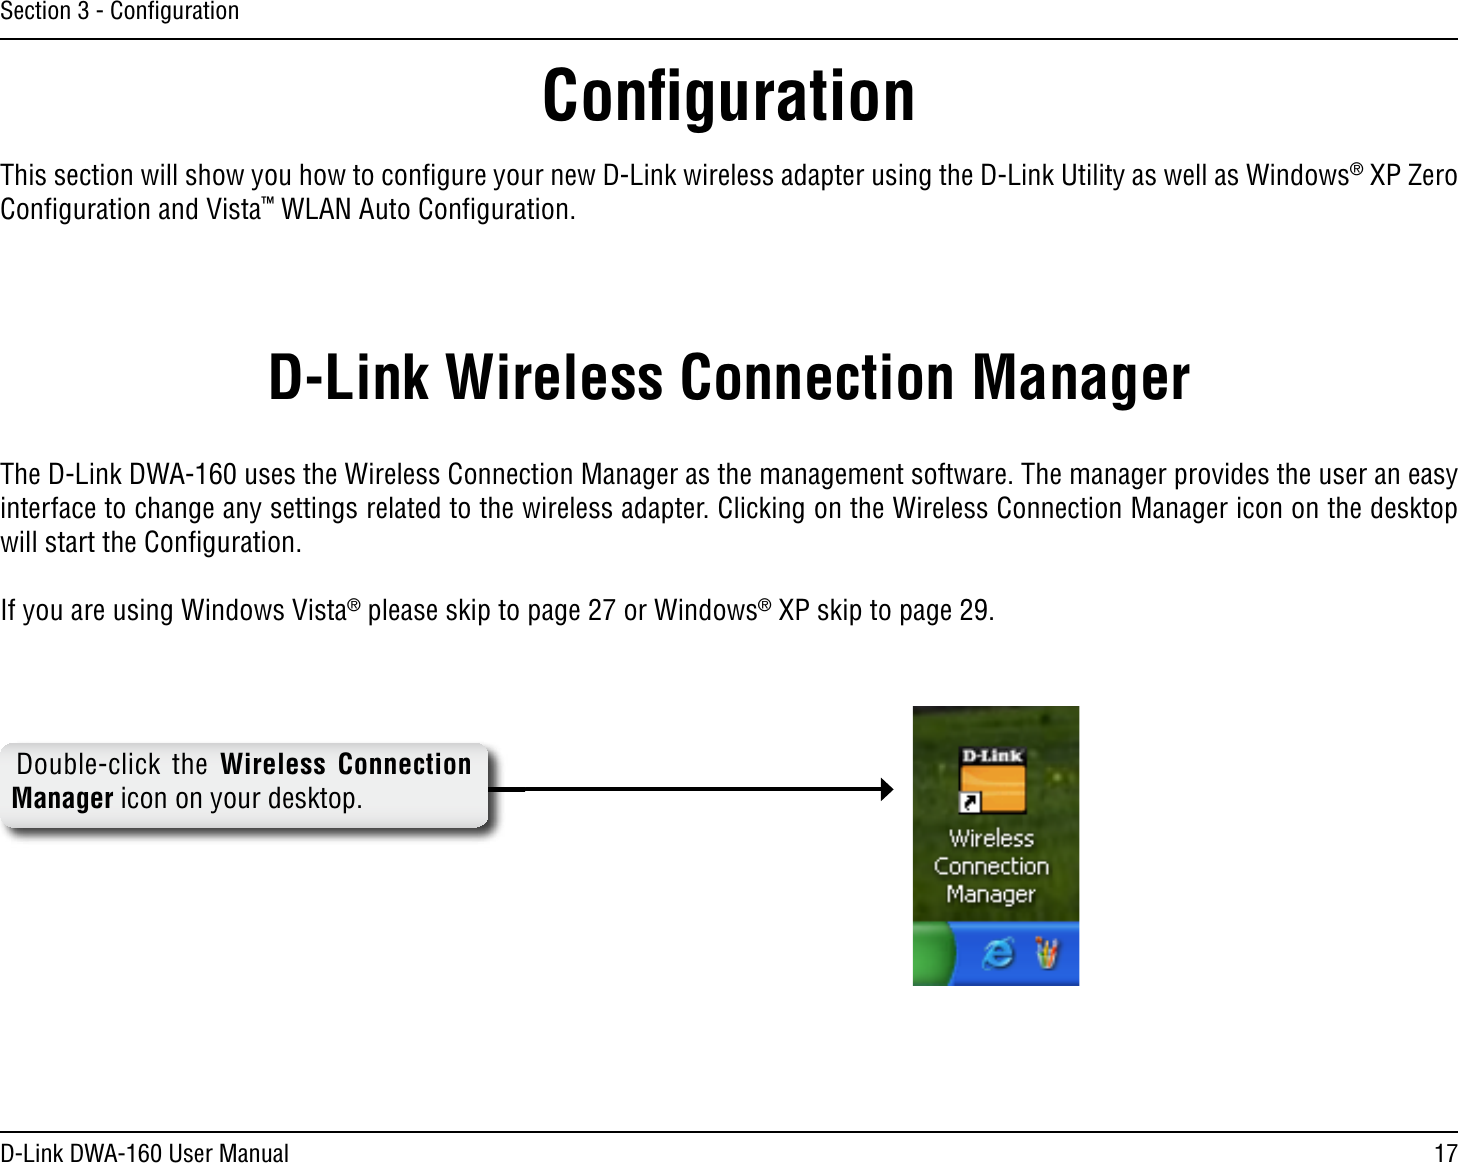 17D-Link DWA-160 User ManualSection 3 - ConﬁgurationConﬁgurationThis section will show you how to conﬁgure your new D-Link wireless adapter using the D-Link Utility as well as Windows® XP Zero Conﬁguration and Vista™ WLAN Auto Conﬁguration.D-Link Wireless Connection ManagerThe D-Link DWA-160 uses the Wireless Connection Manager as the management software. The manager provides the user an easy interface to change any settings related to the wireless adapter. Clicking on the Wireless Connection Manager icon on the desktop will start the Conﬁguration.If you are using Windows Vista® please skip to page 27 or Windows® XP skip to page 29.Double-click the Wireless Connection Manager icon on your desktop.